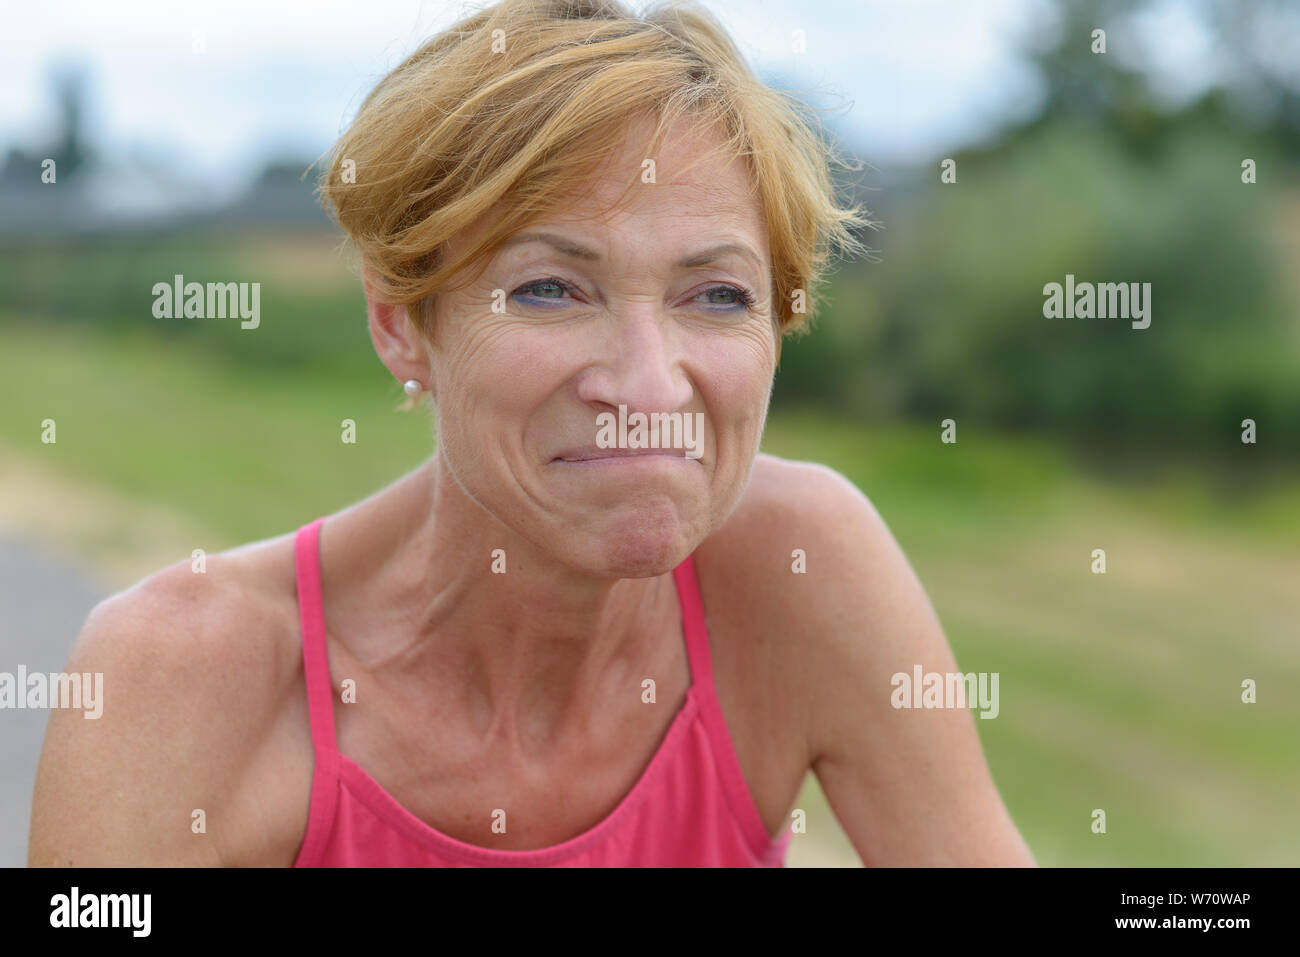 Middle-aged woman grimacing with a wry expression as she stands outdoors in summer in the countryside in a close up portrait Stock Photo